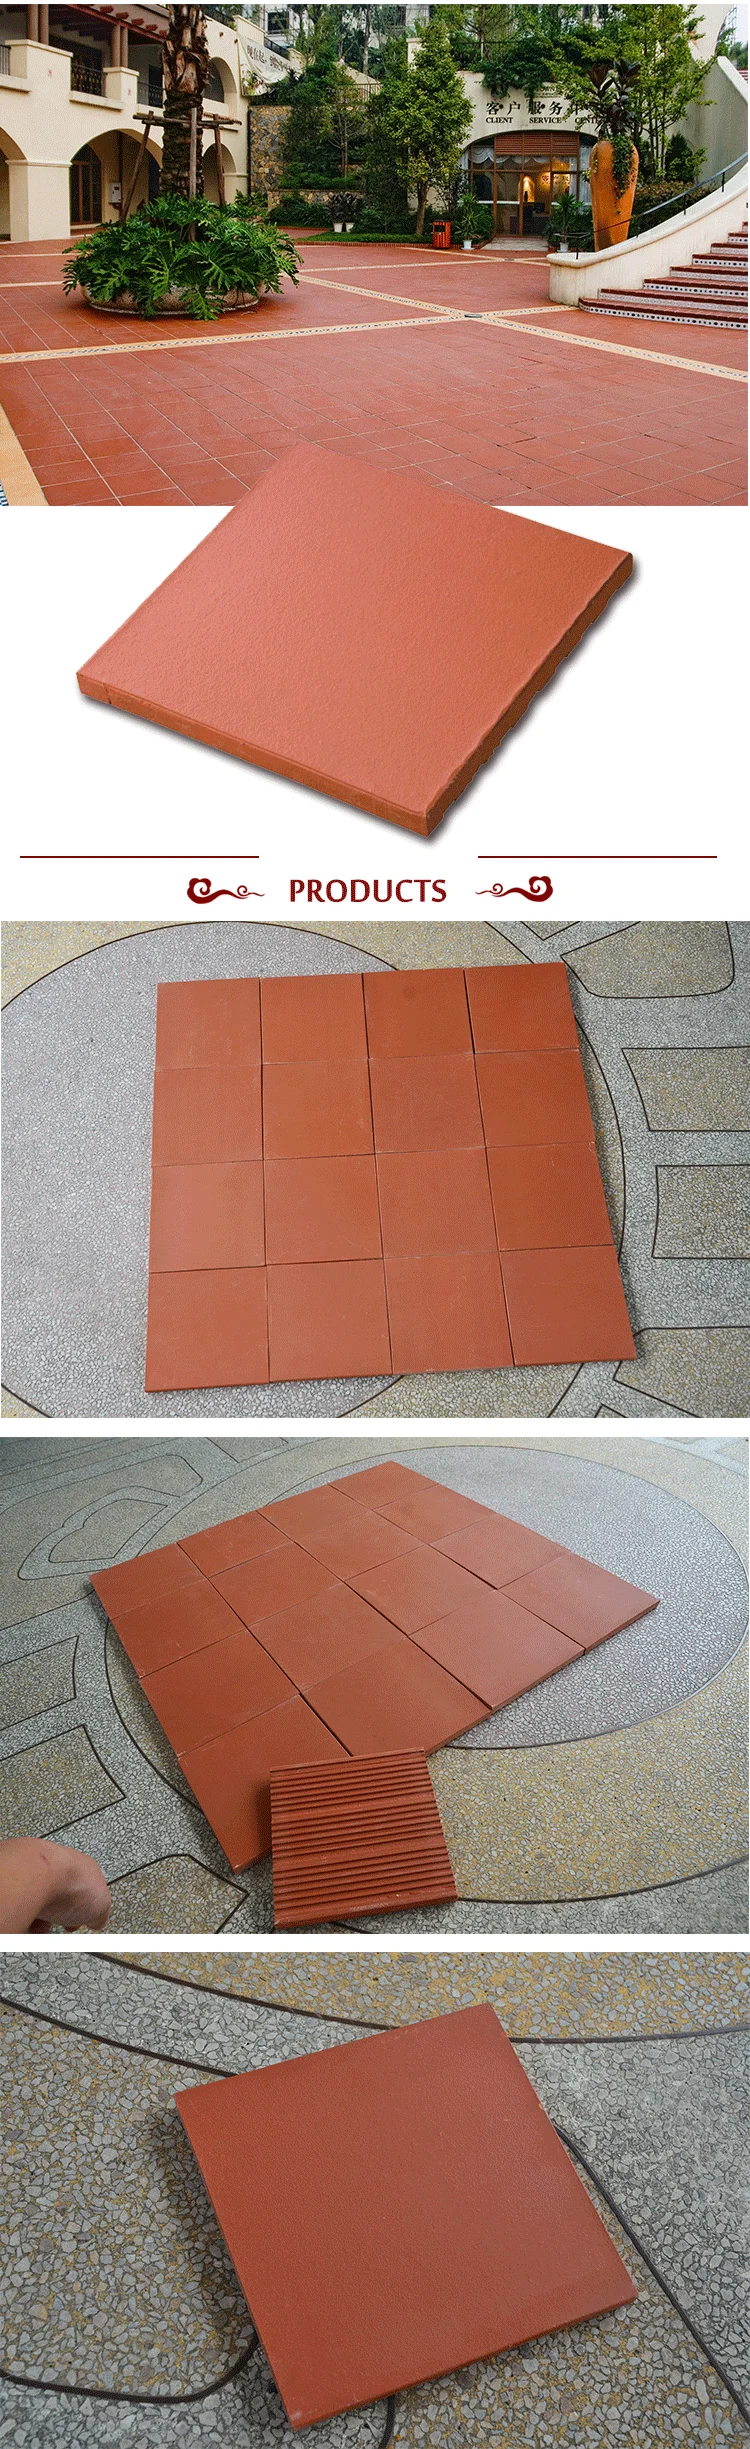 Mpo-006 Exterior Red Clay Floor Tile - Buy Red Clay Floor Tile,Clay